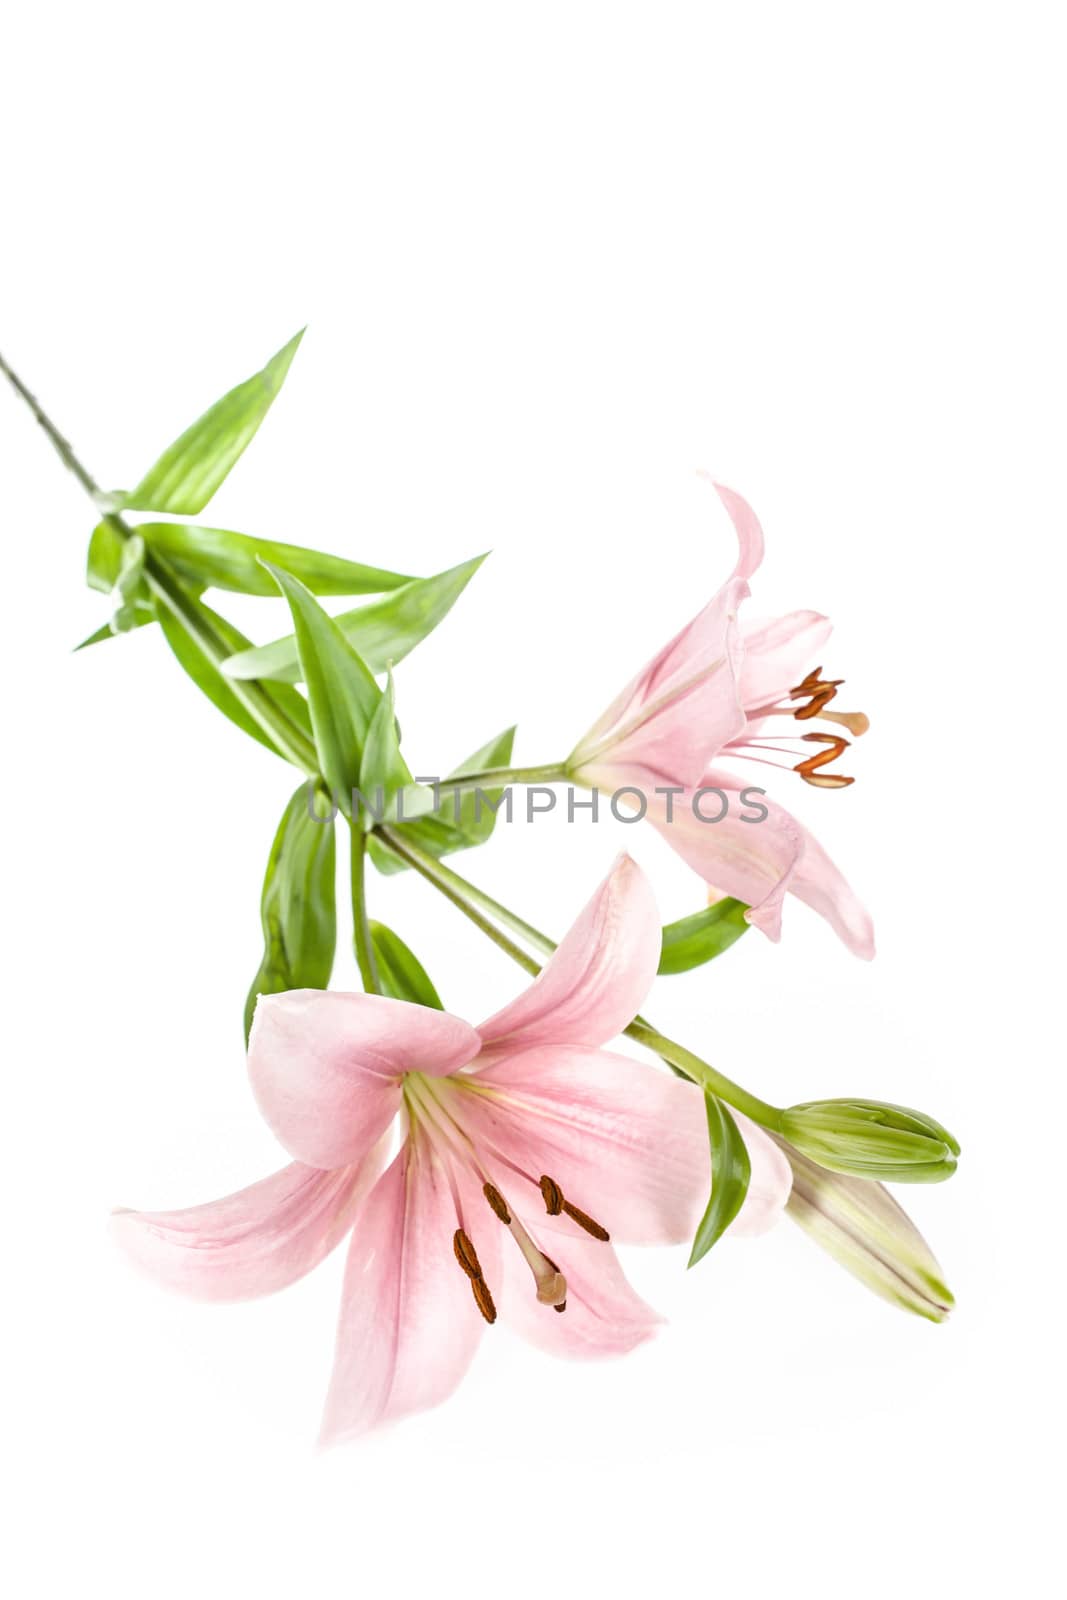 Lily flower by Sportactive